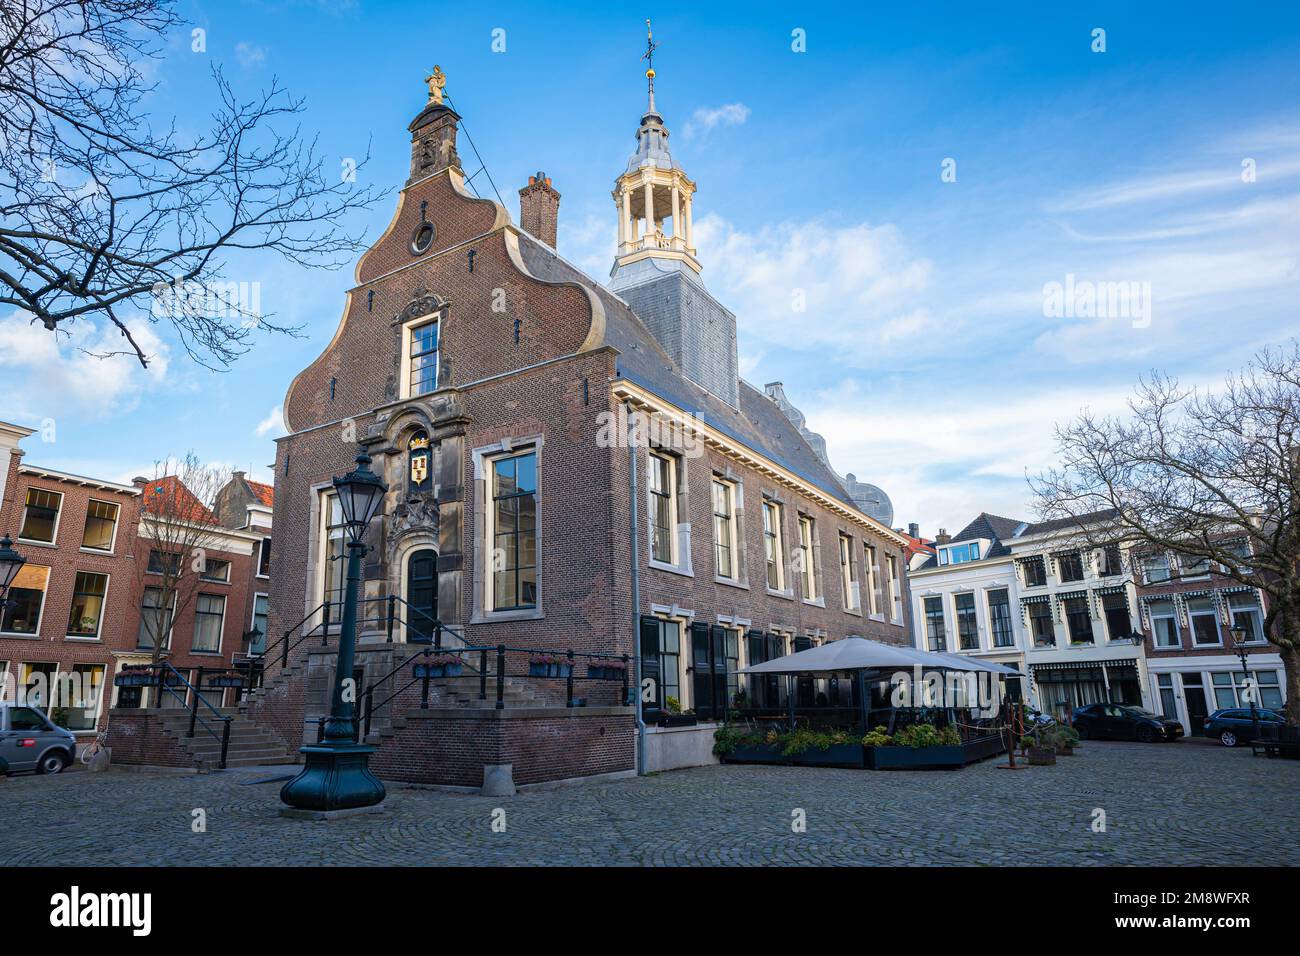 Picturesque old city hall on the town square in Schiedam, The Netherlands Stock Photo